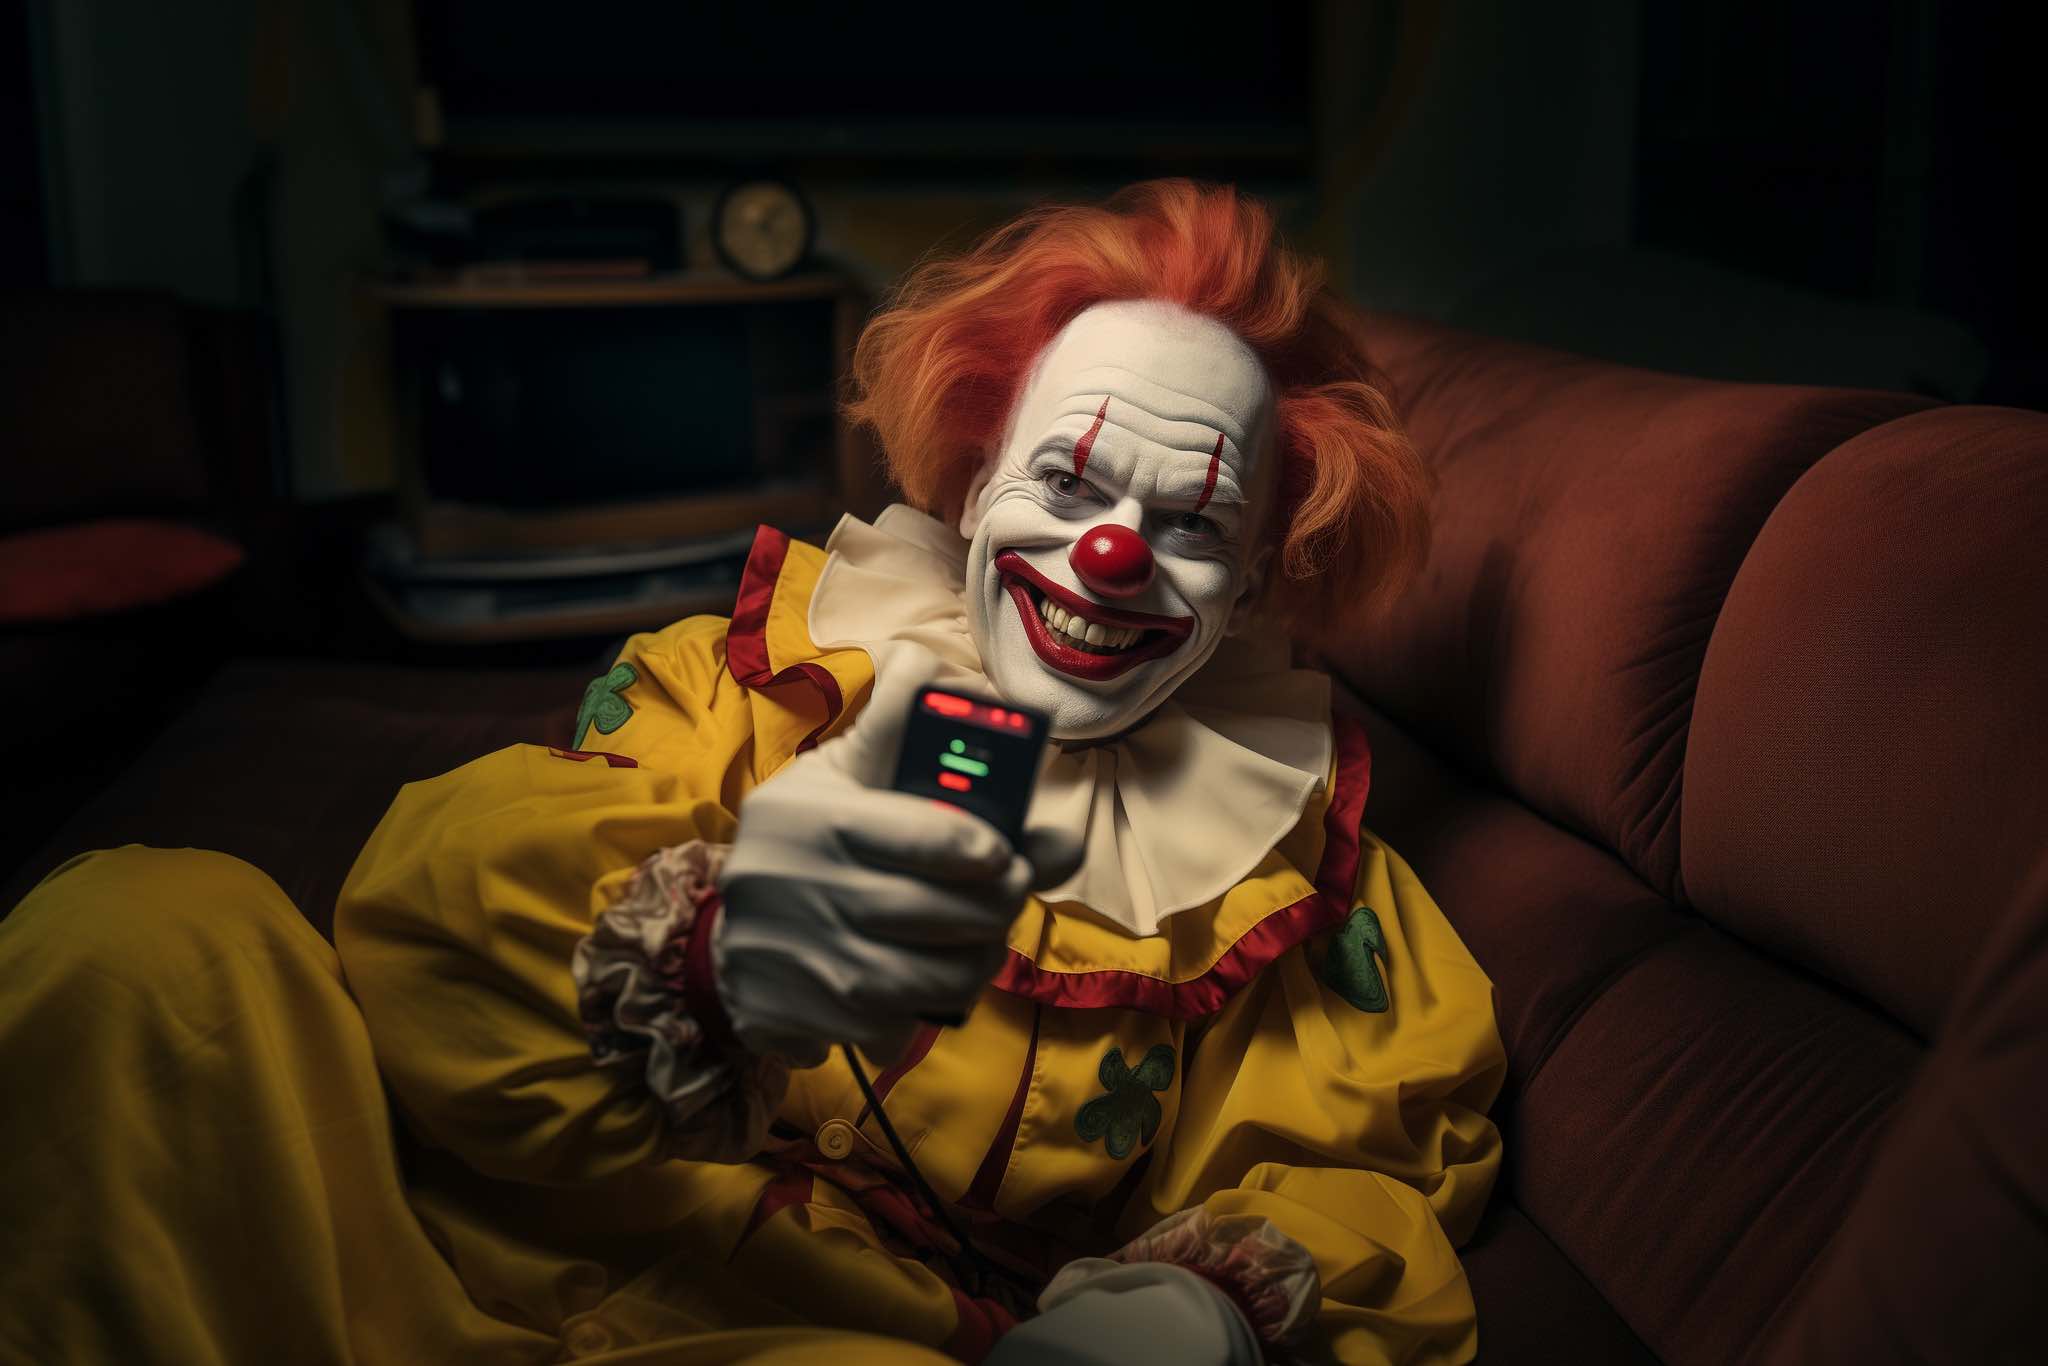 Clown with TV remote. Did he damage his hotel room?